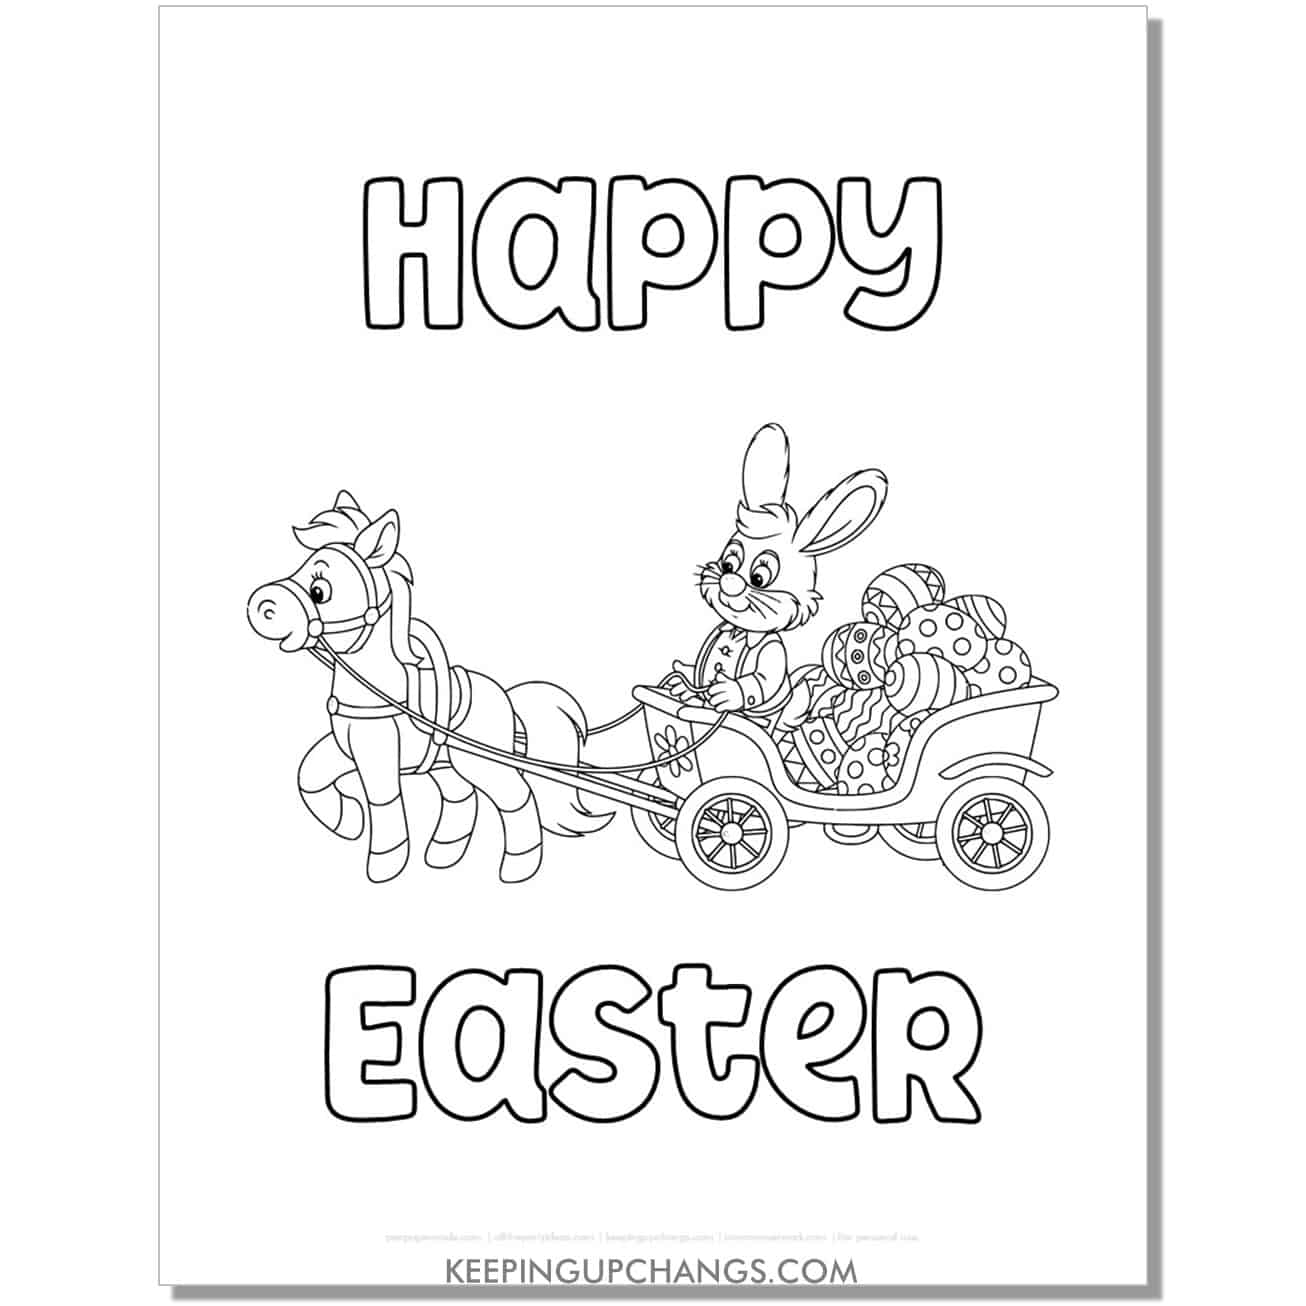 happy easter bunny with cart full of eggs coloring page, sheet.